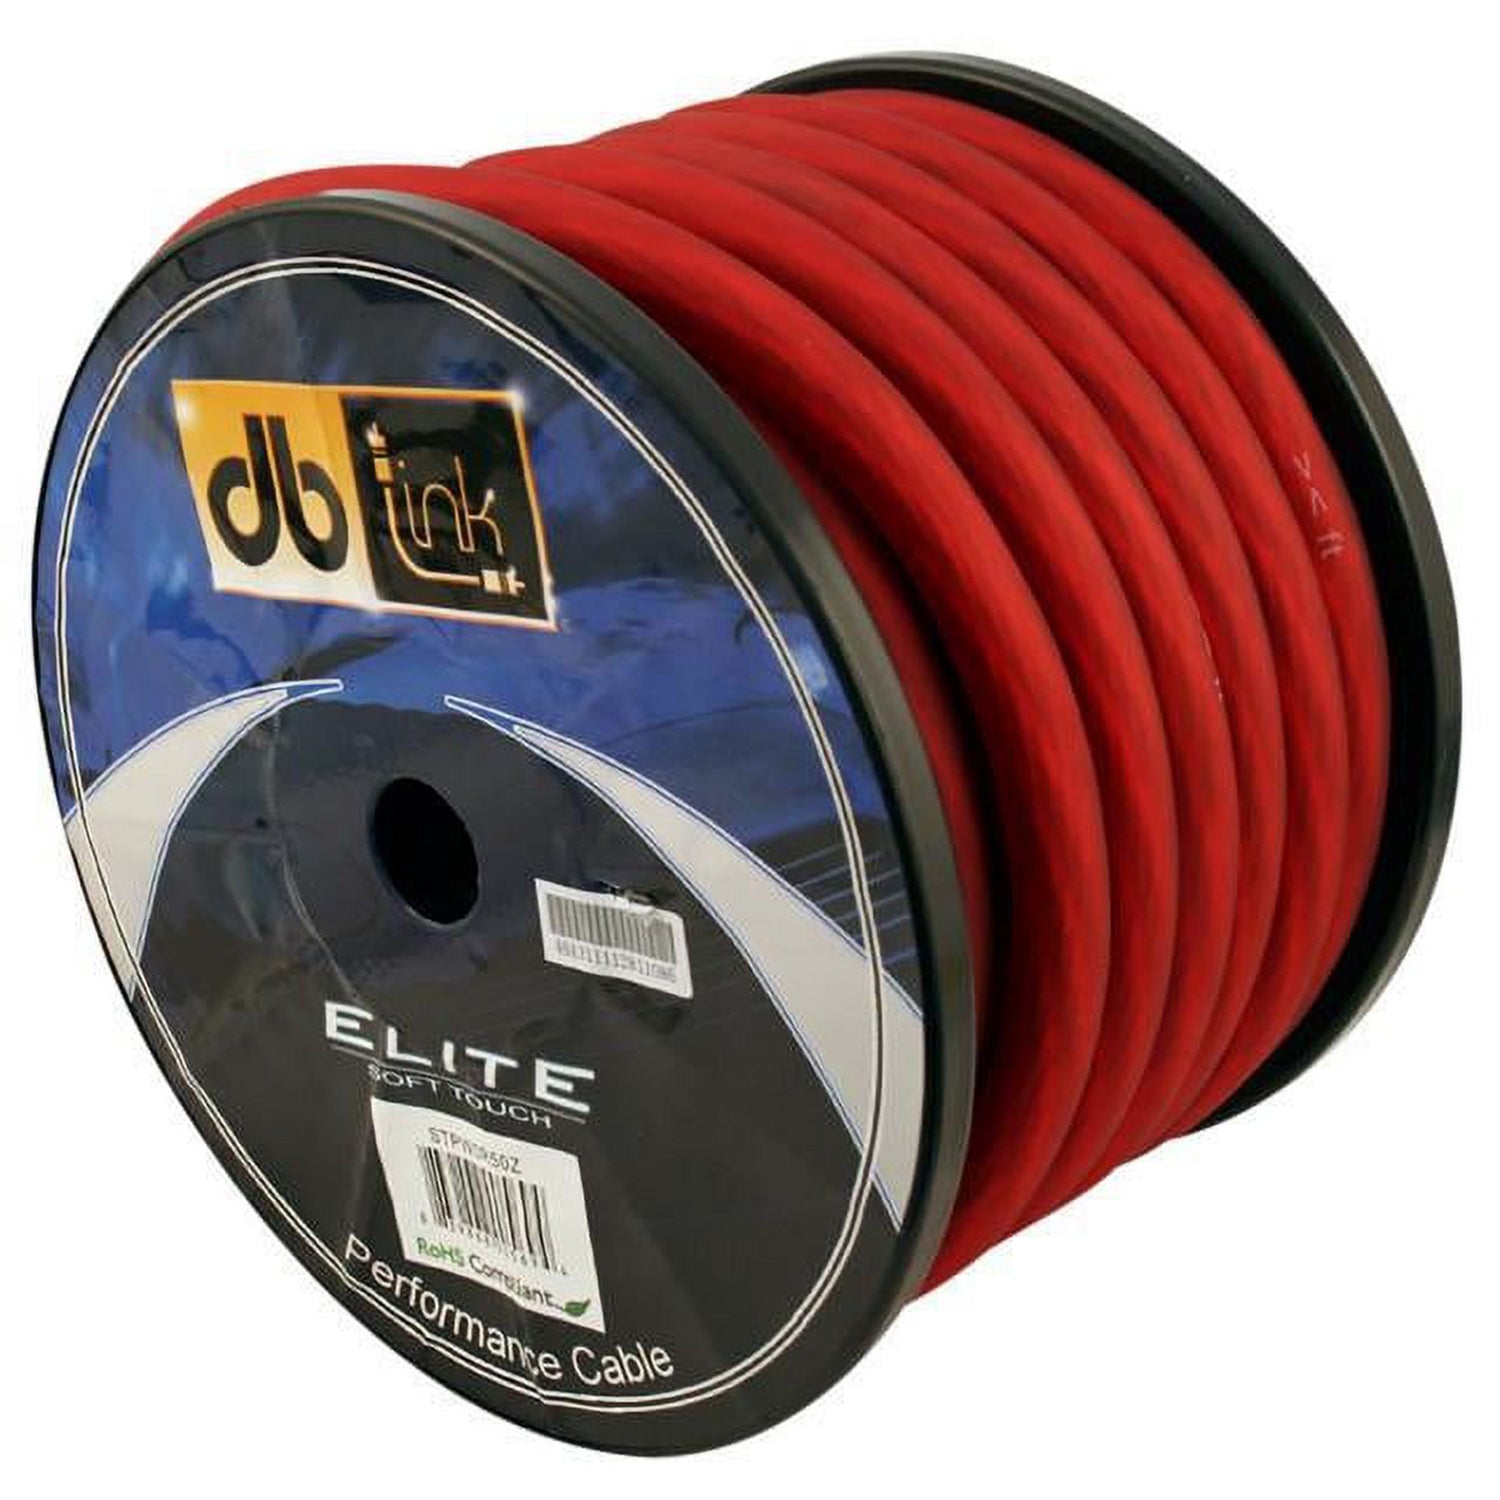 18 Gauge Remote Wire, 500ft Spool